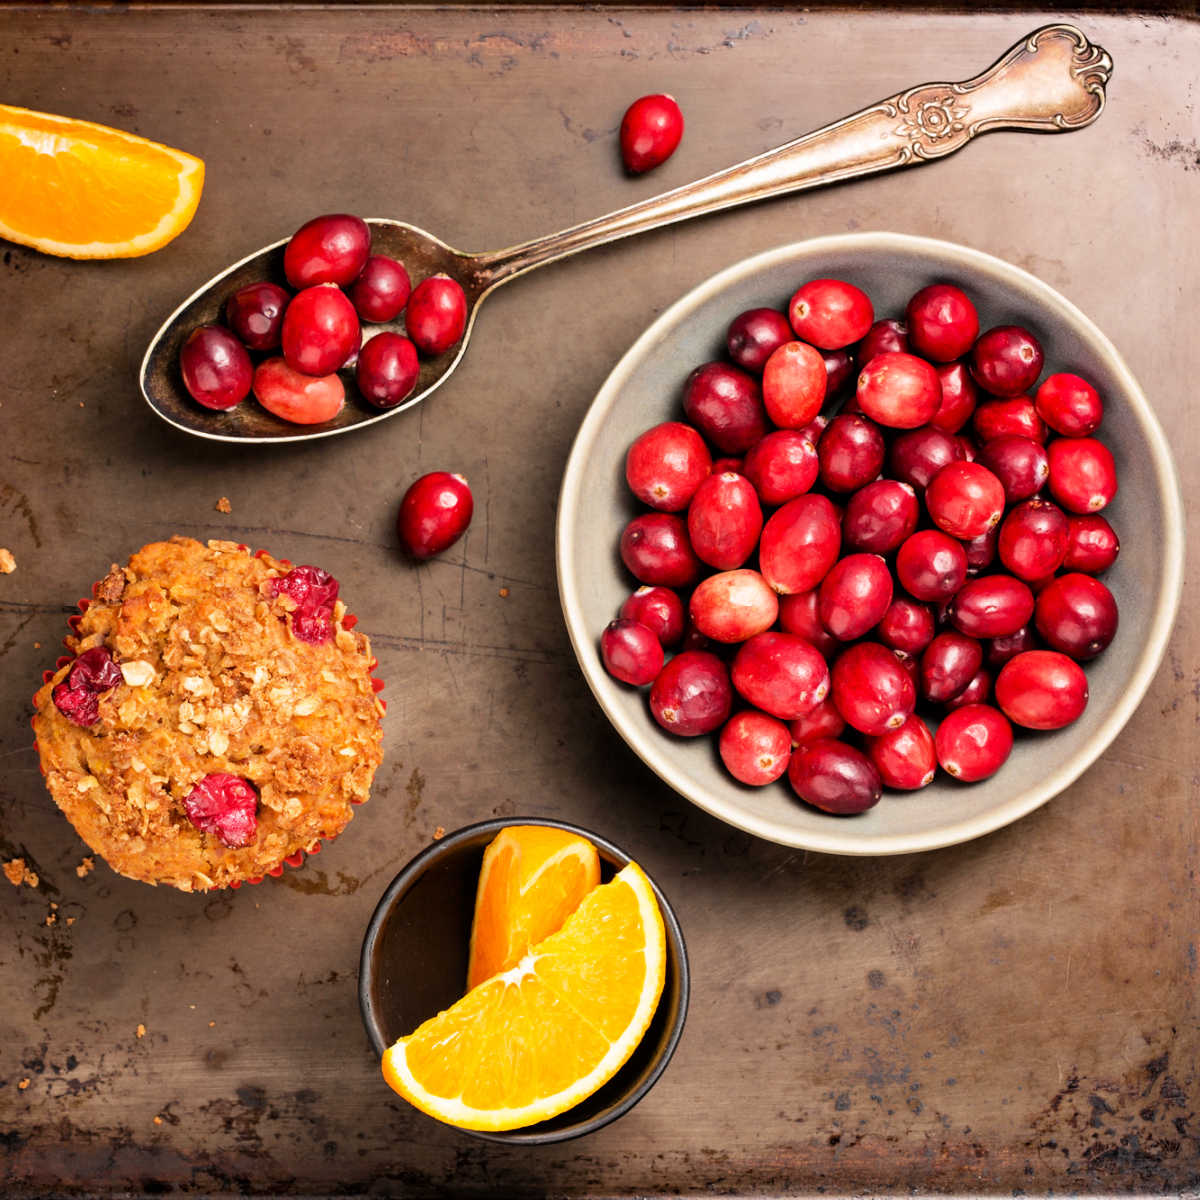 Orange cranberry muffin on a custom dark cement countertop with ingredients called for in recipe - fresh oranges and fresh cranberries.